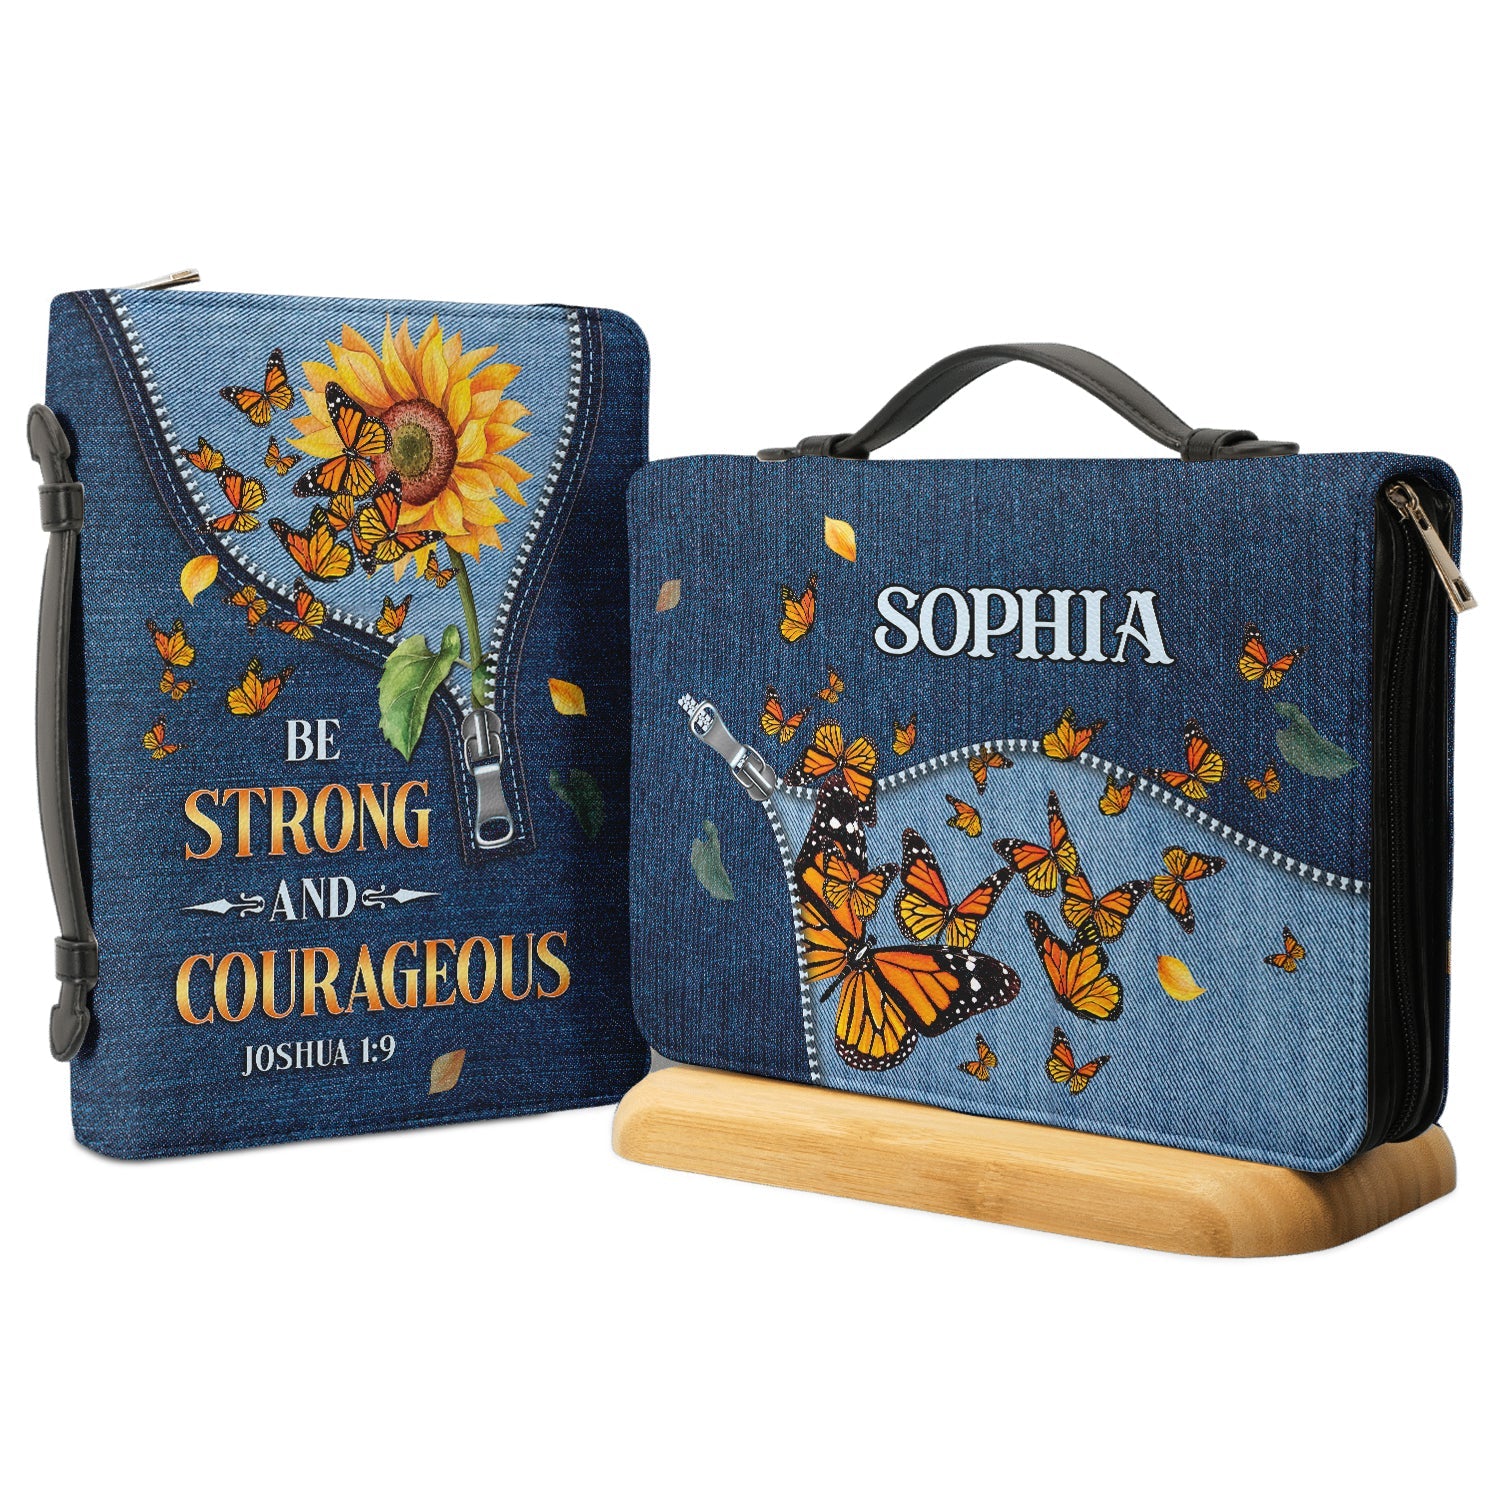  Personalized Bible Cover - Be Strong And Courageous Joshua 1 9 Butterfly Bible Cover for Christians